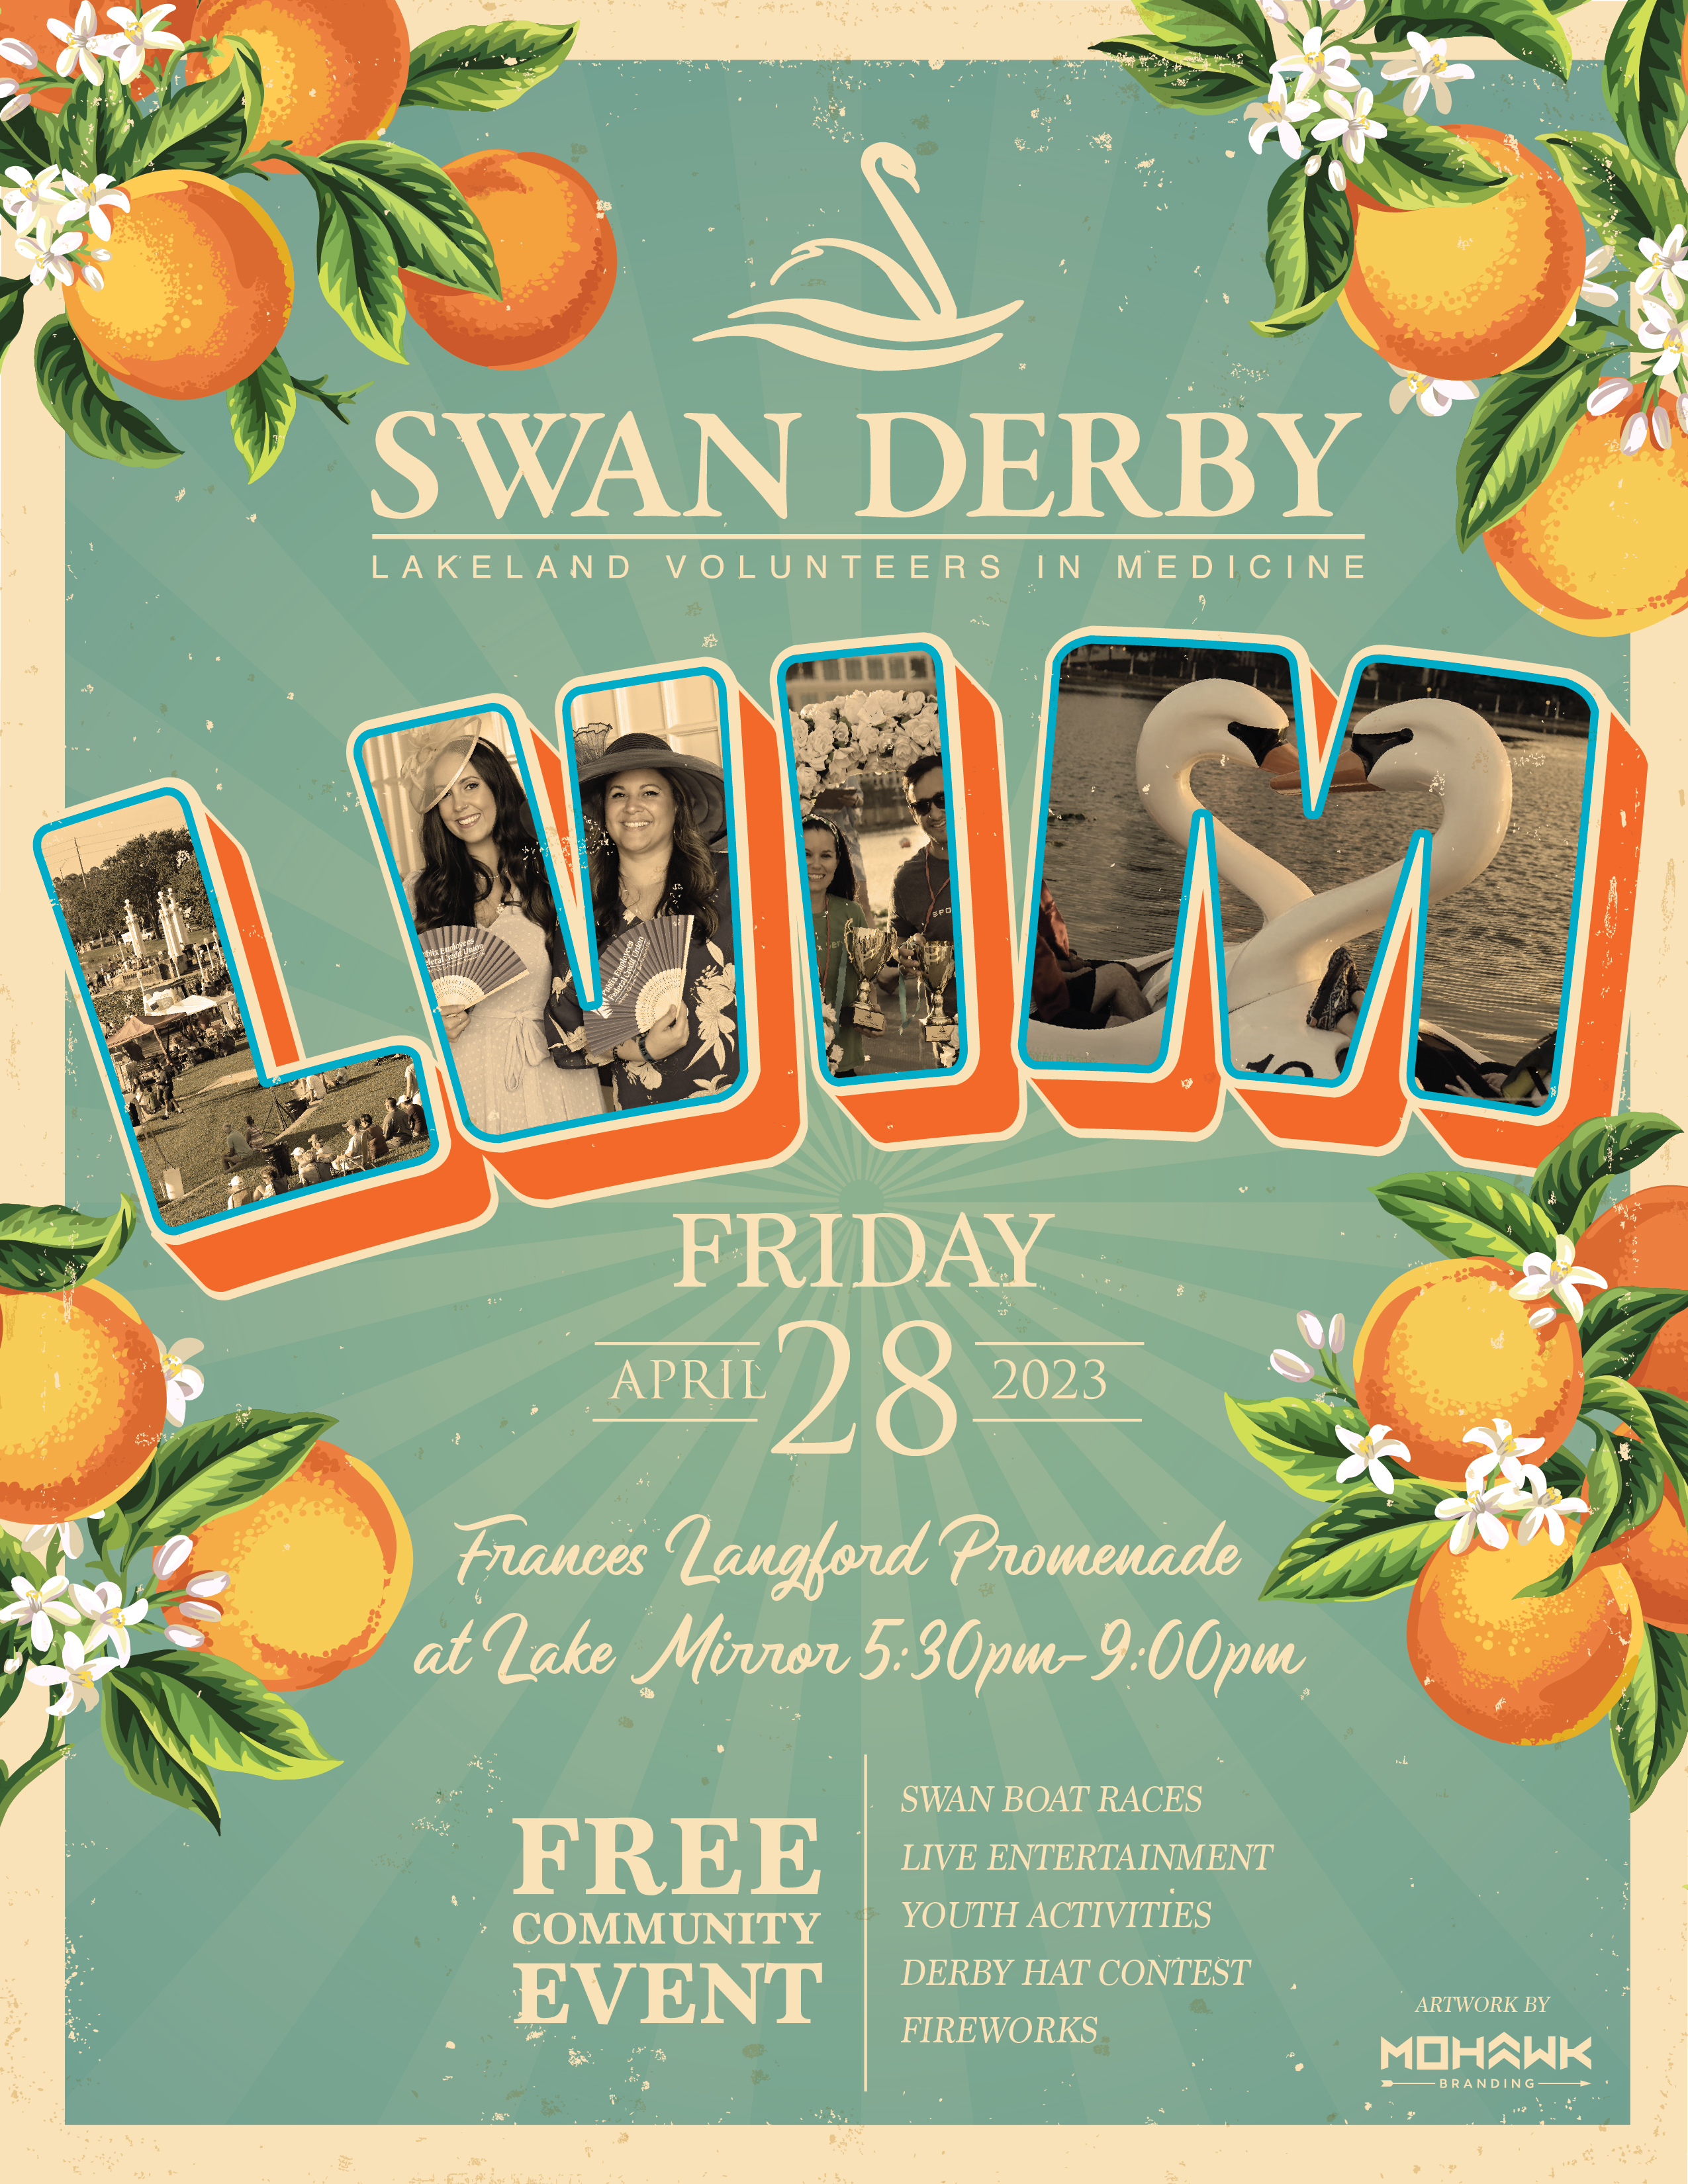 swan derby, lakeland volunteers in medicine.  friday april 28, 2023.  frances langford promenade at lake mirror,  5:30-9pm, swan boat races, live entertainment, youth activities, derby hat contest, fireworks, free event for the community